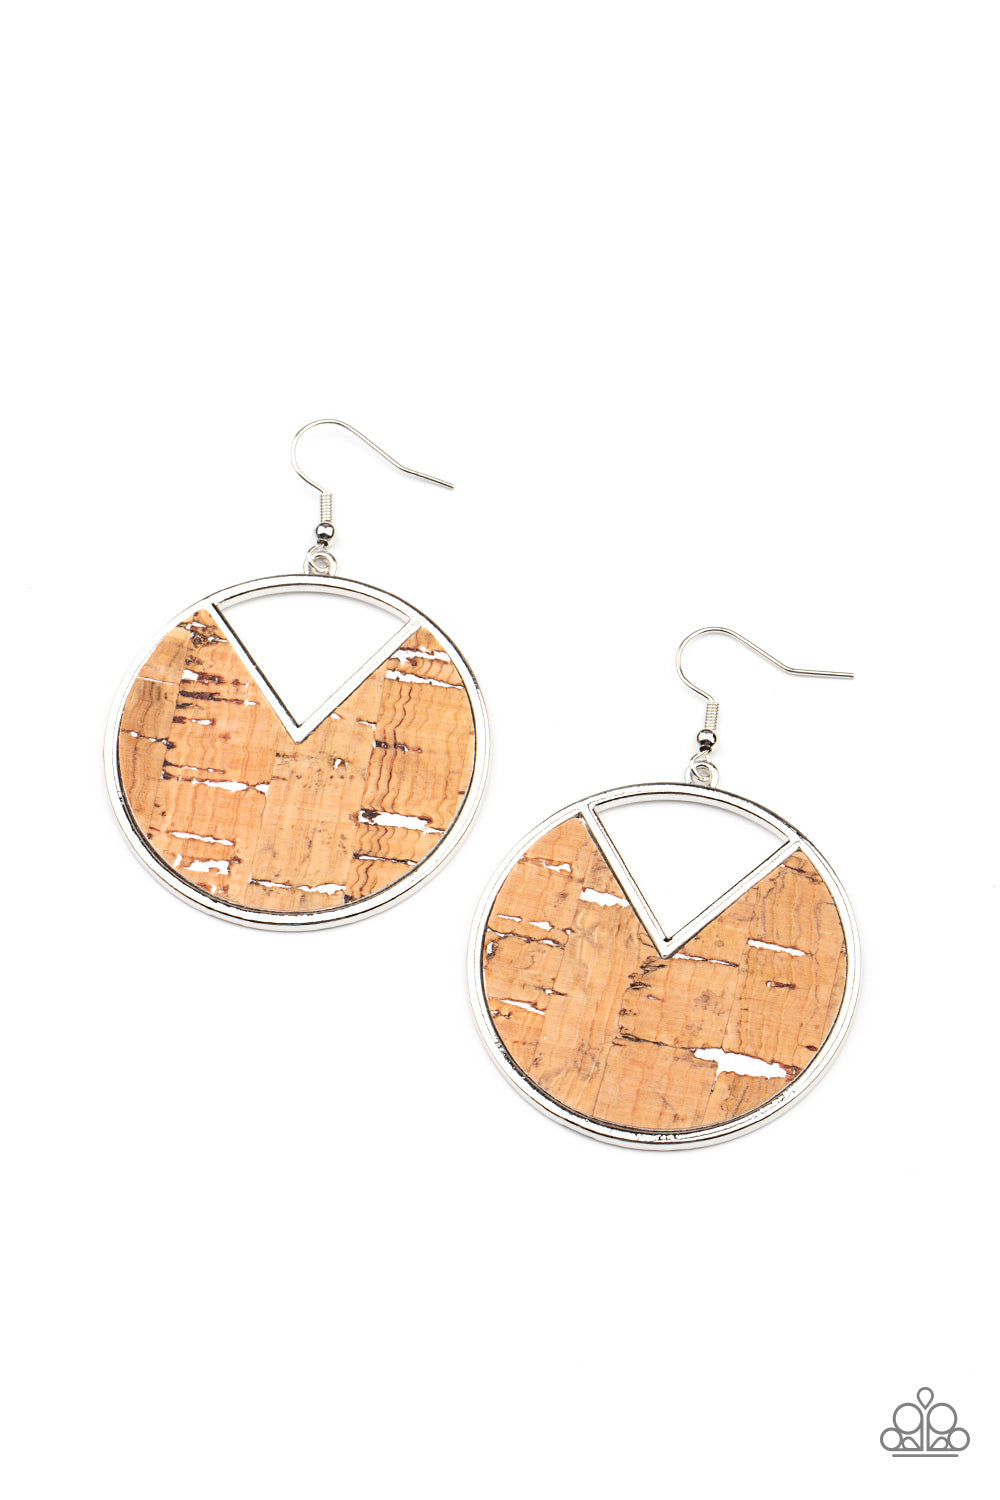 Nod to Nature White Earring - Paparazzi Accessories  Featuring hints of white accents, an earthy piece of cork is placed into the center of a circular hoop. A triangular slice is removed from the cork, creating an edgy airy finish. Earring attaches to a standard fishhook fitting.  Sold as one pair of earrings.